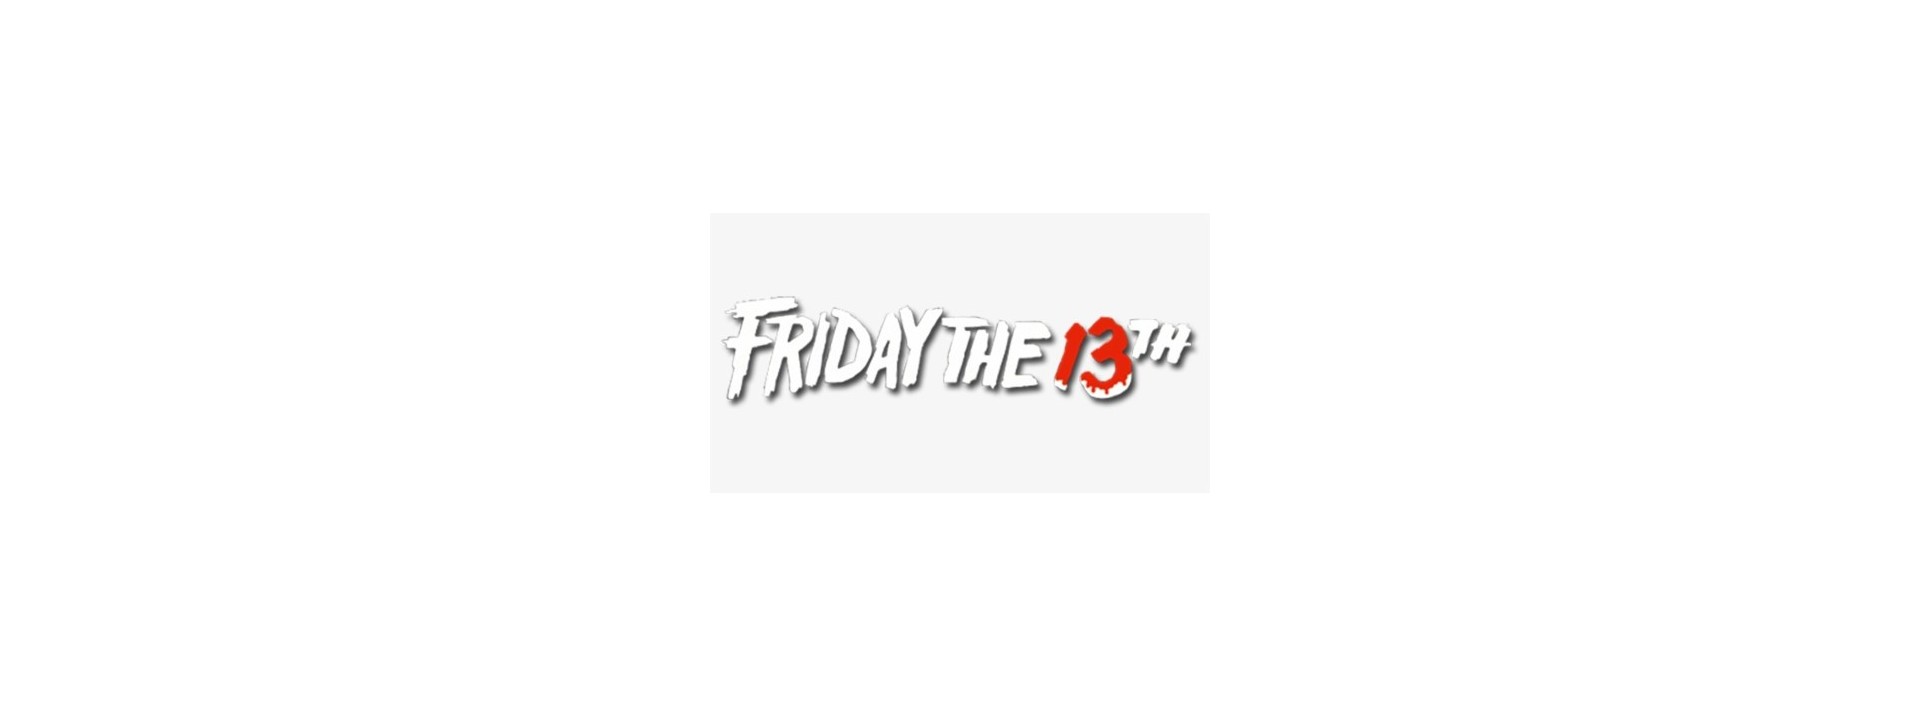 FRIDAY THE 13 TH